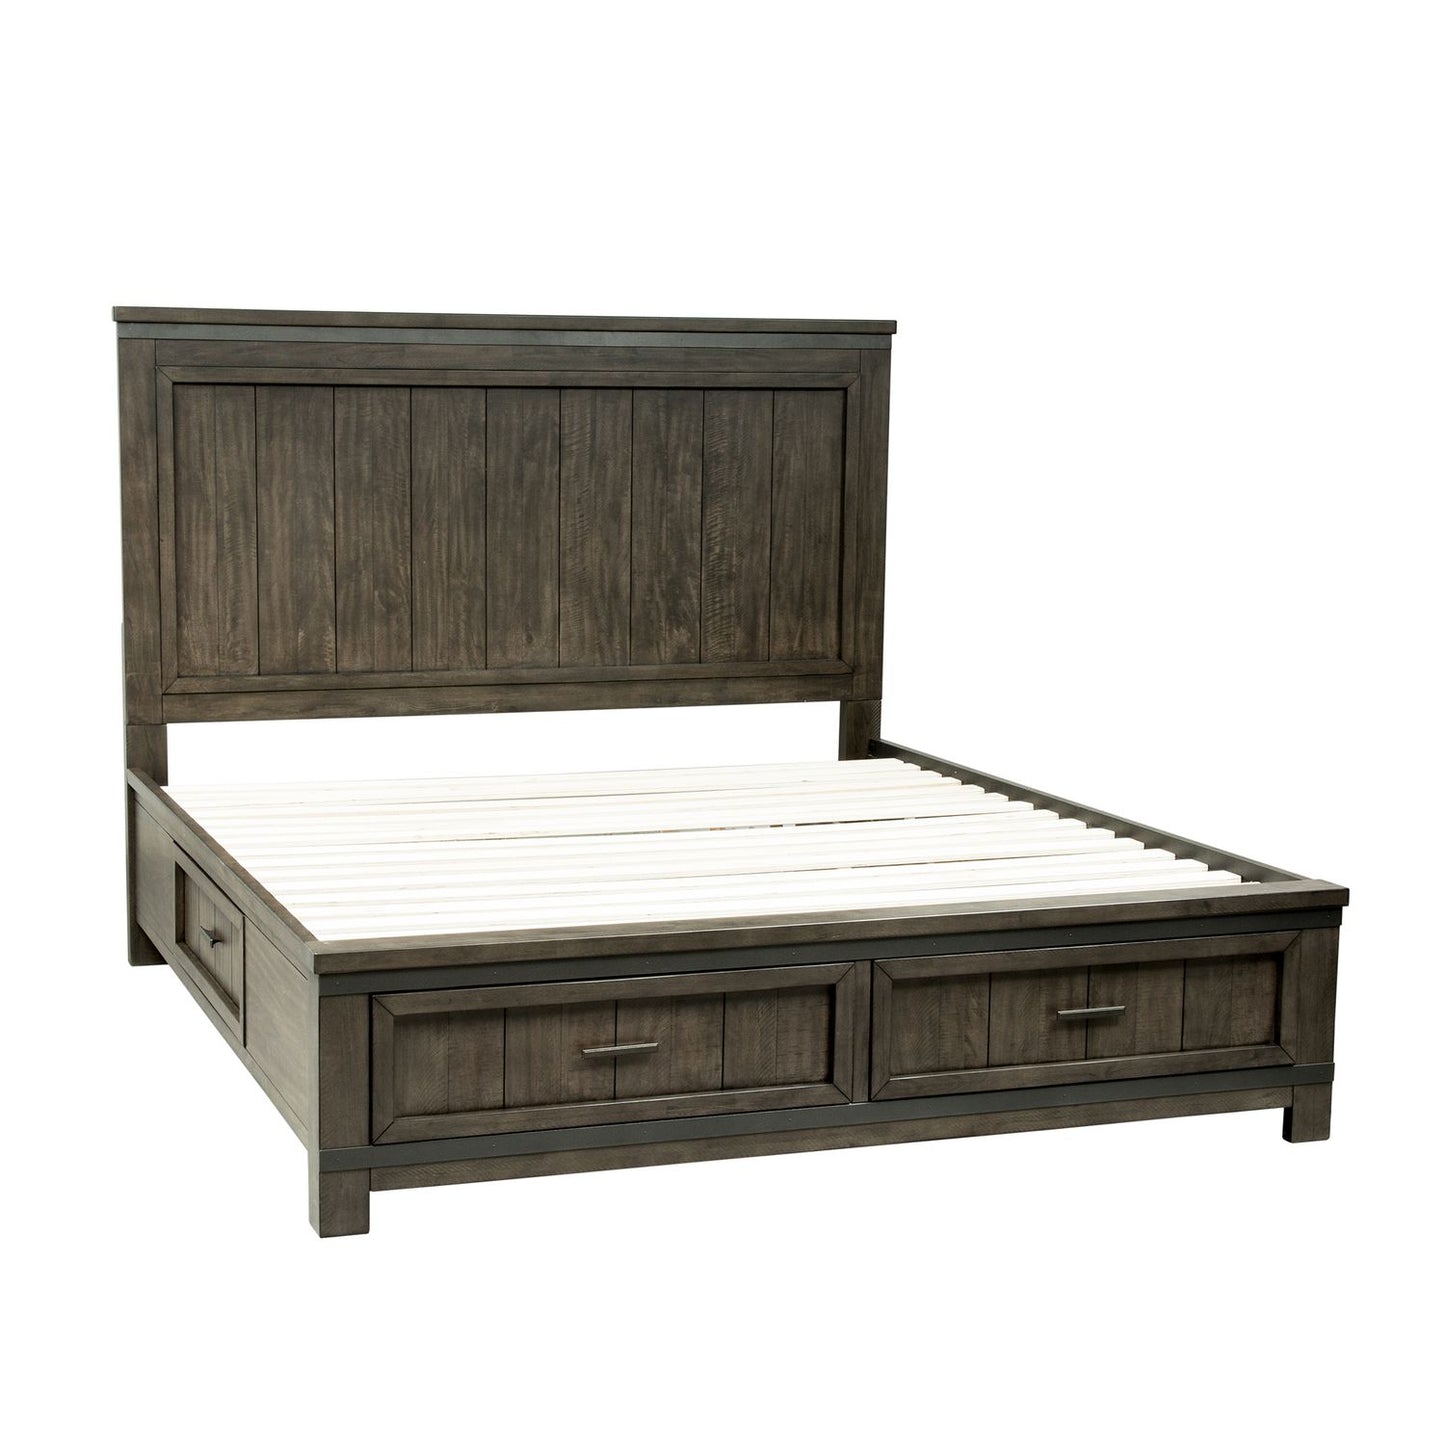 Thornwood Hills - King Two Sided Storage Bed